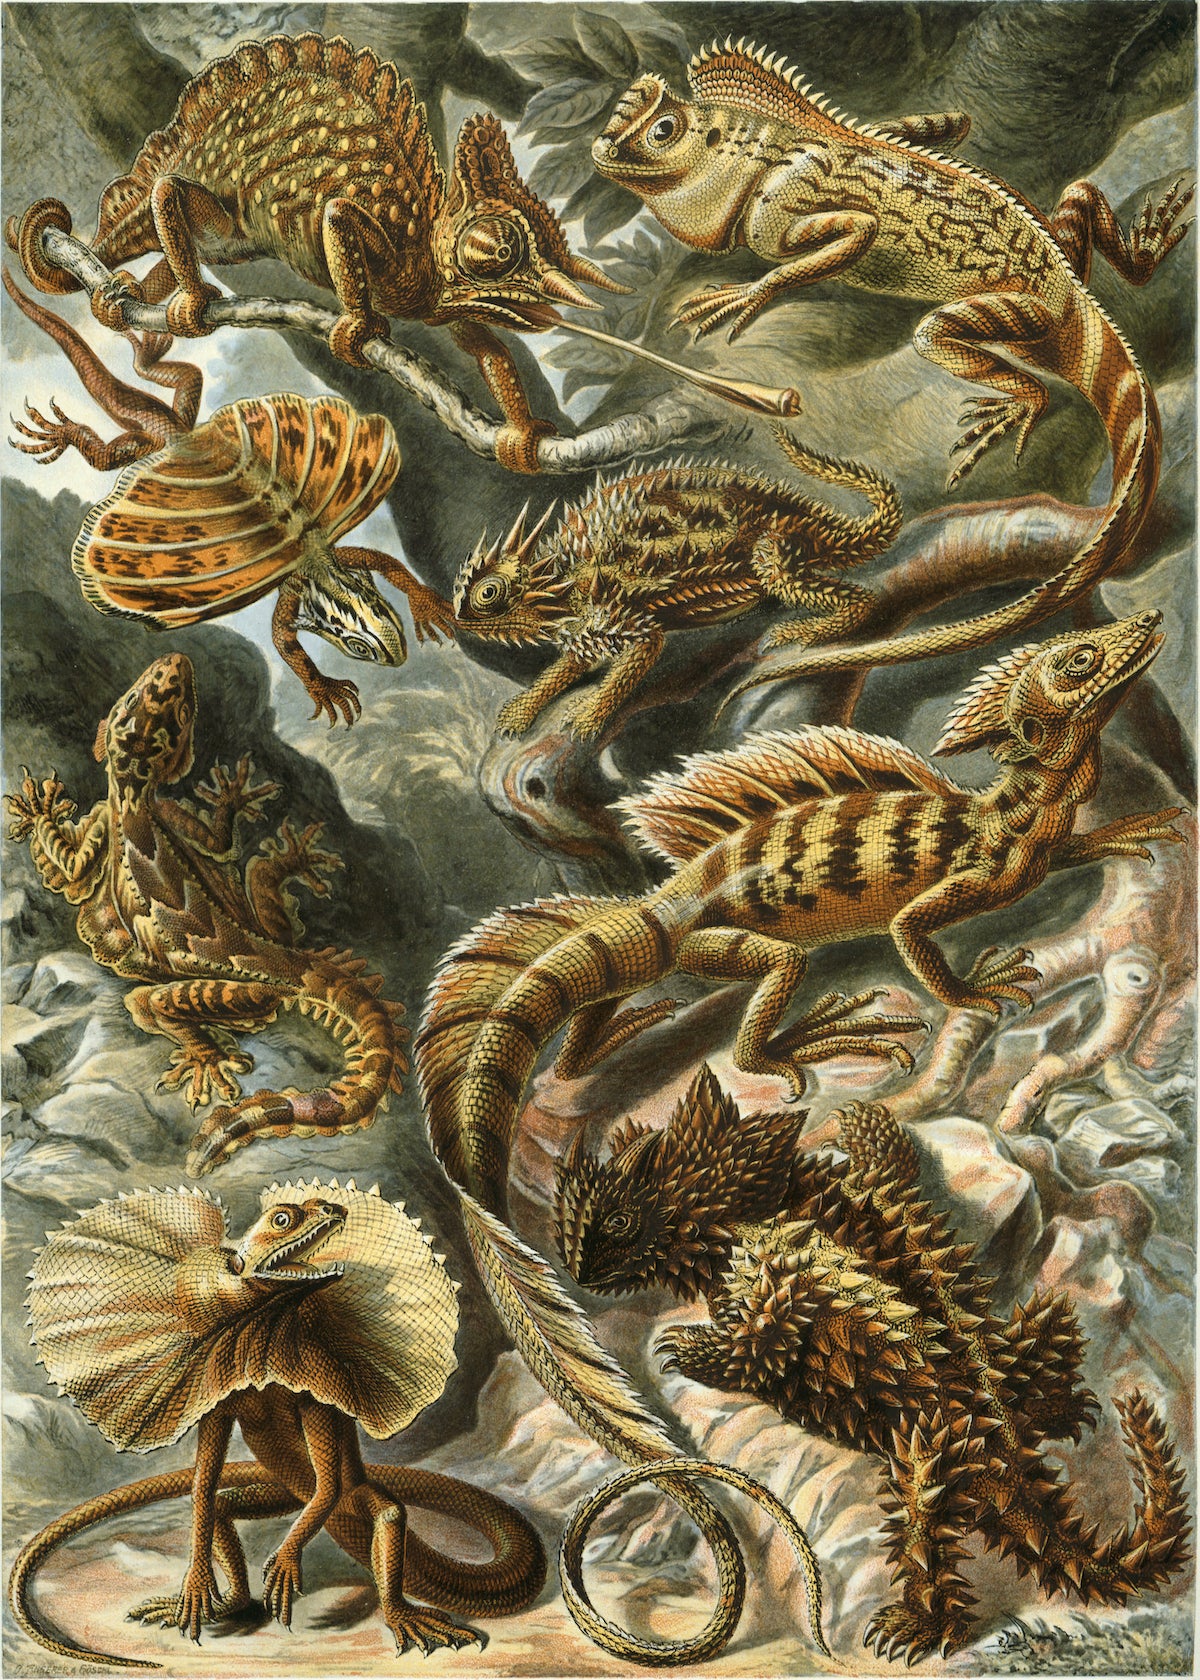 Lithographic plate from Ernst Haeckel's Kunstformen der Natur (1904) depicts a variety of lizards.